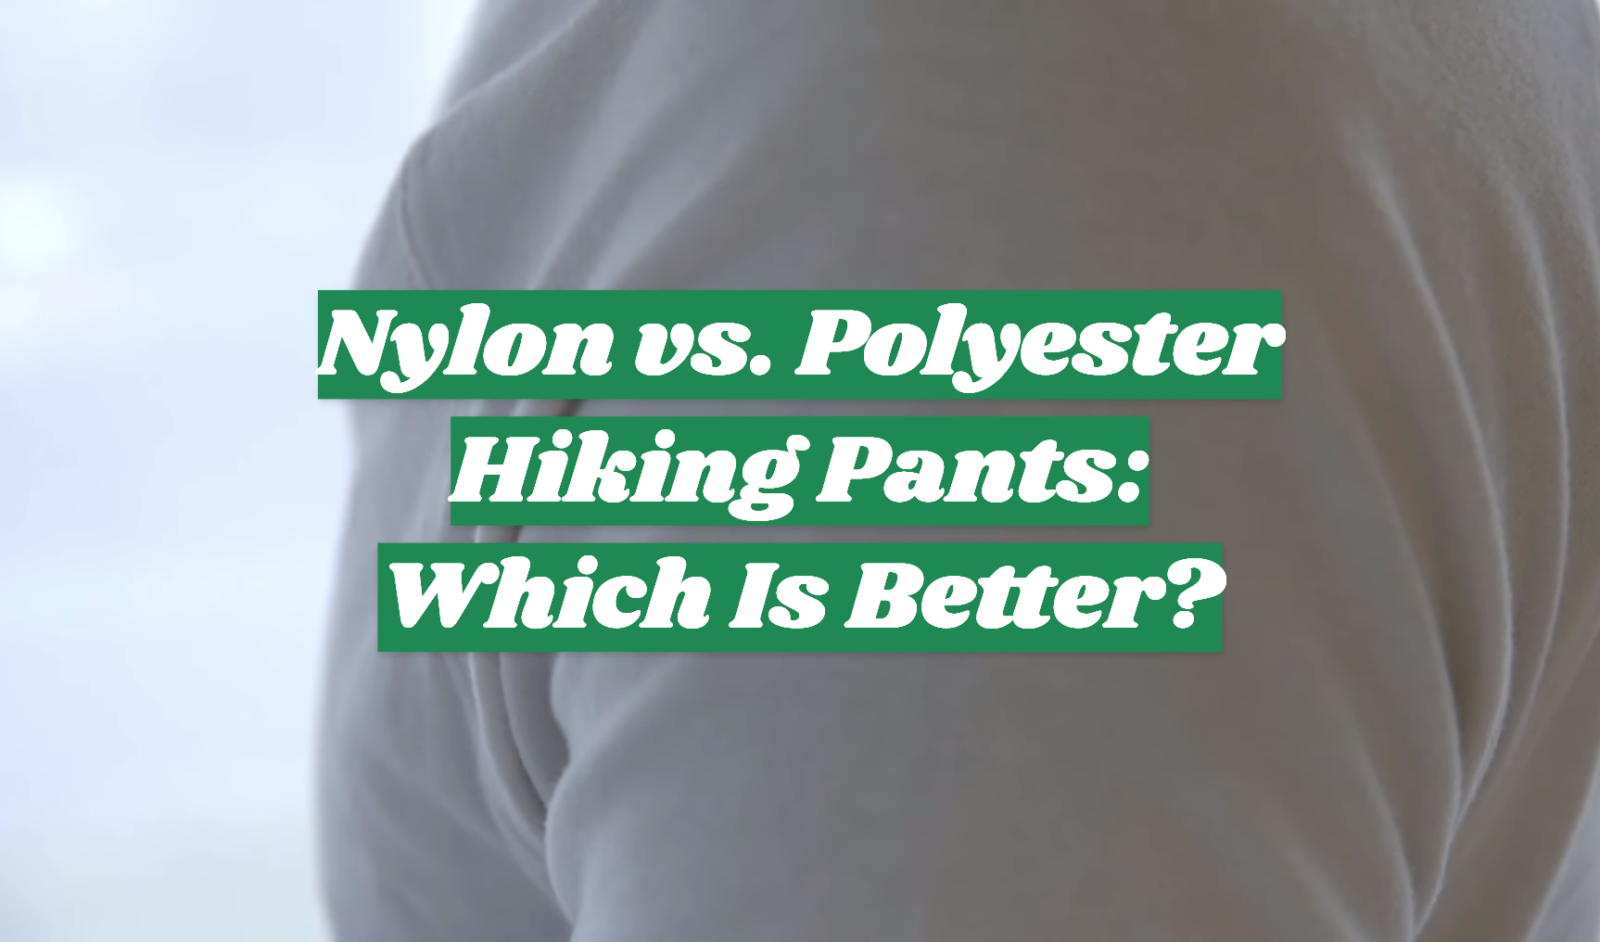 Nylon vs. Polyester Hiking Pants: Which Is Better?